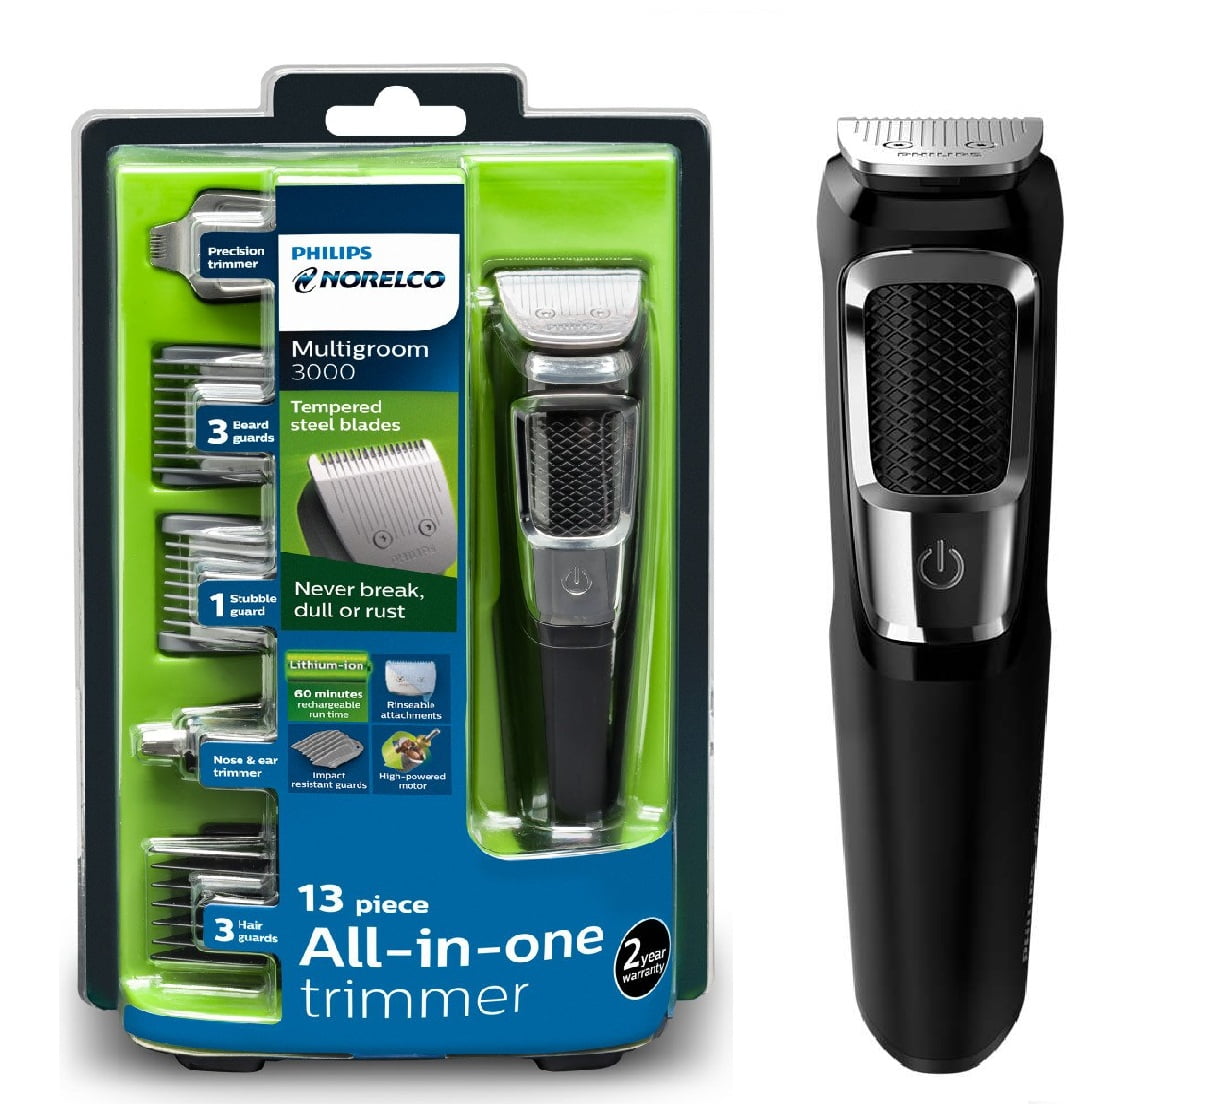 Philips Norelco Multigroom All-In-One Series 3000, 13 attachment trimmer,  MG3750 